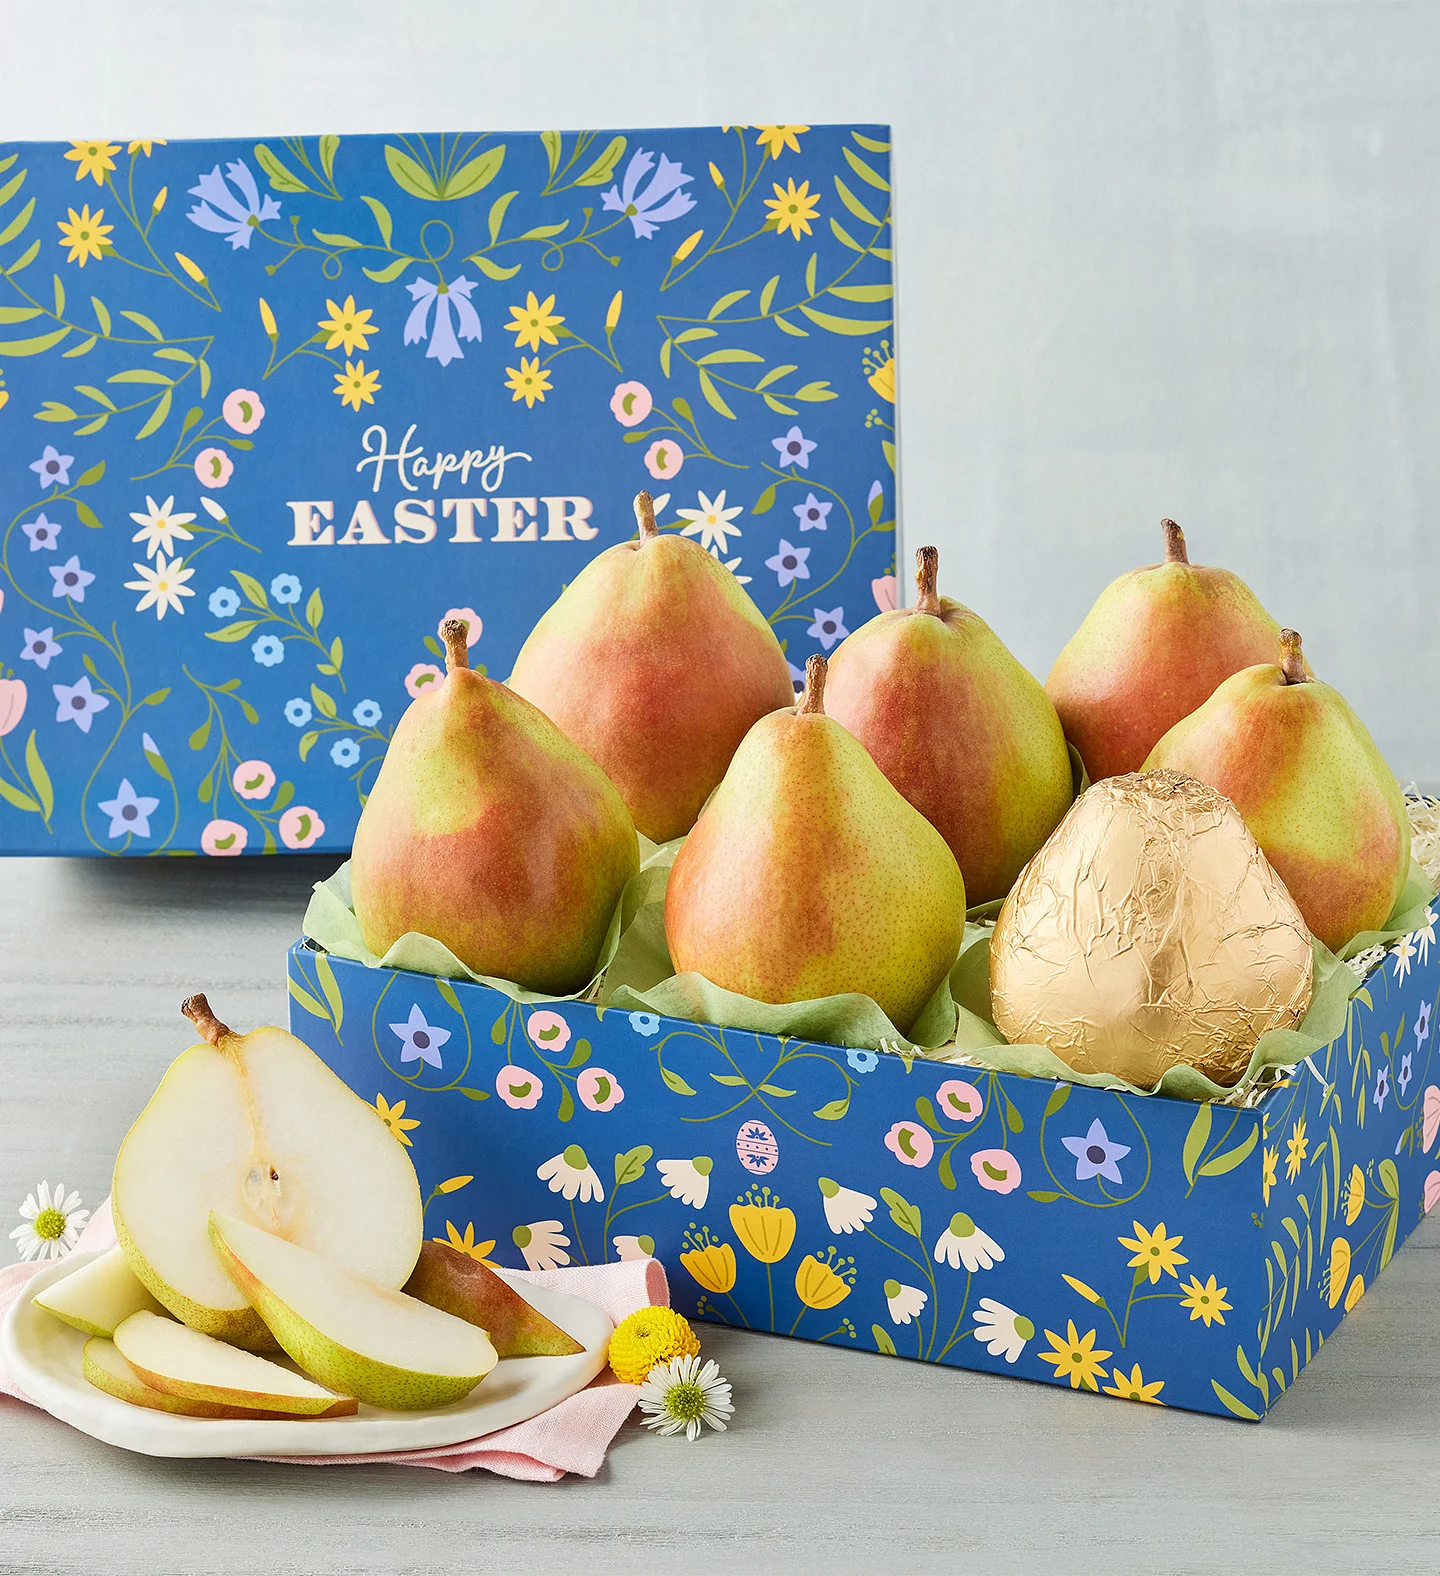 easter gift ideas Royal Verano Pear Easter Gift Box